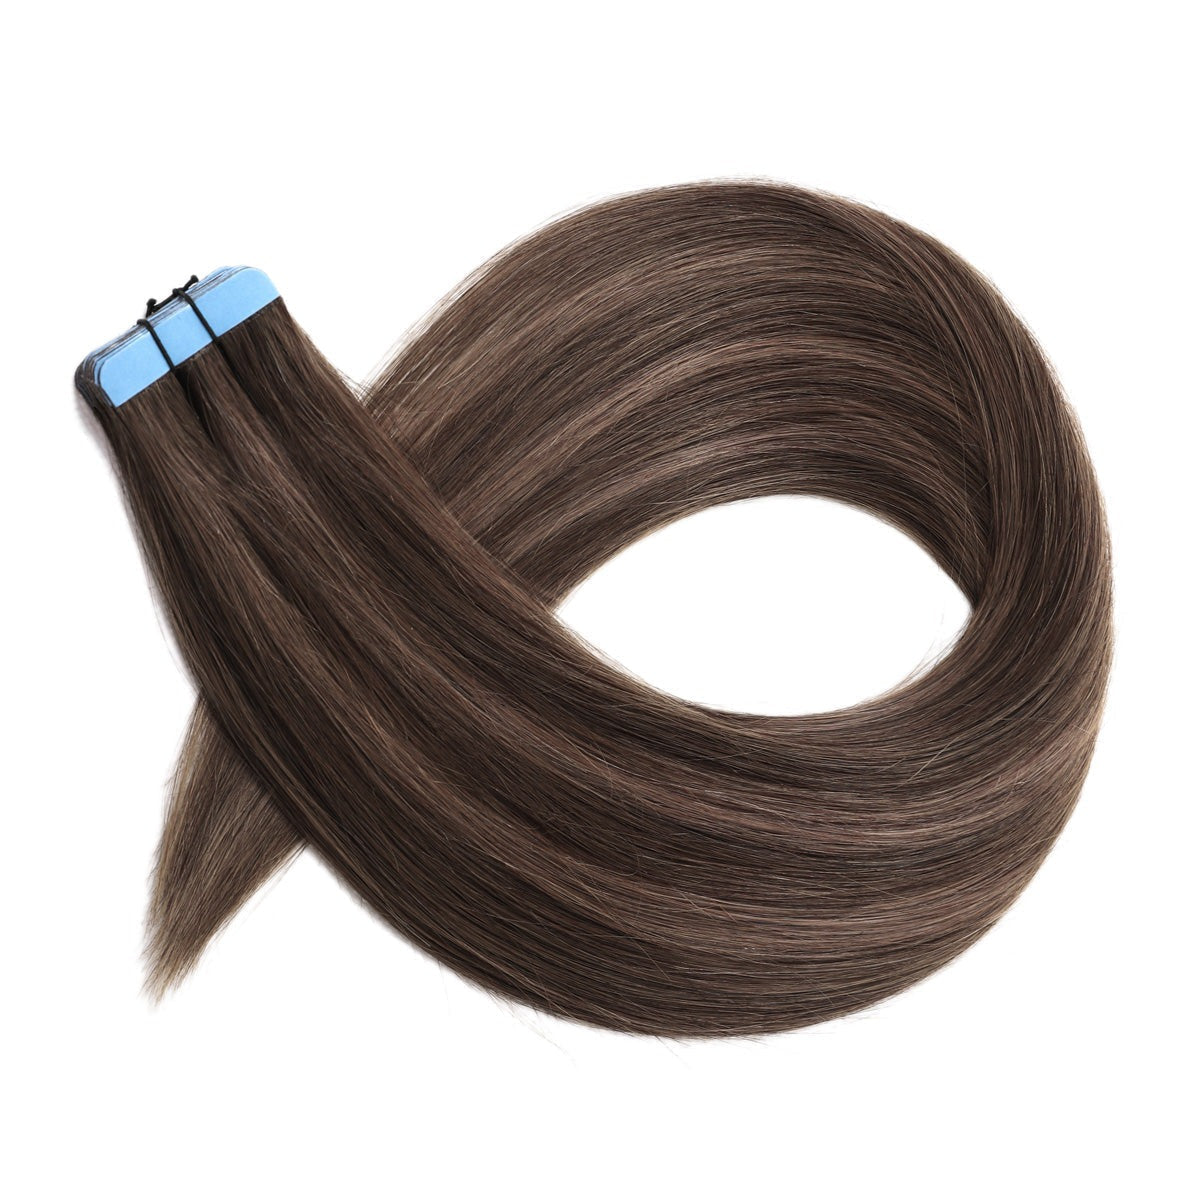 Sample Hair Extensions Colour Match #2c/8a Chocolate and Ash Brown Mix